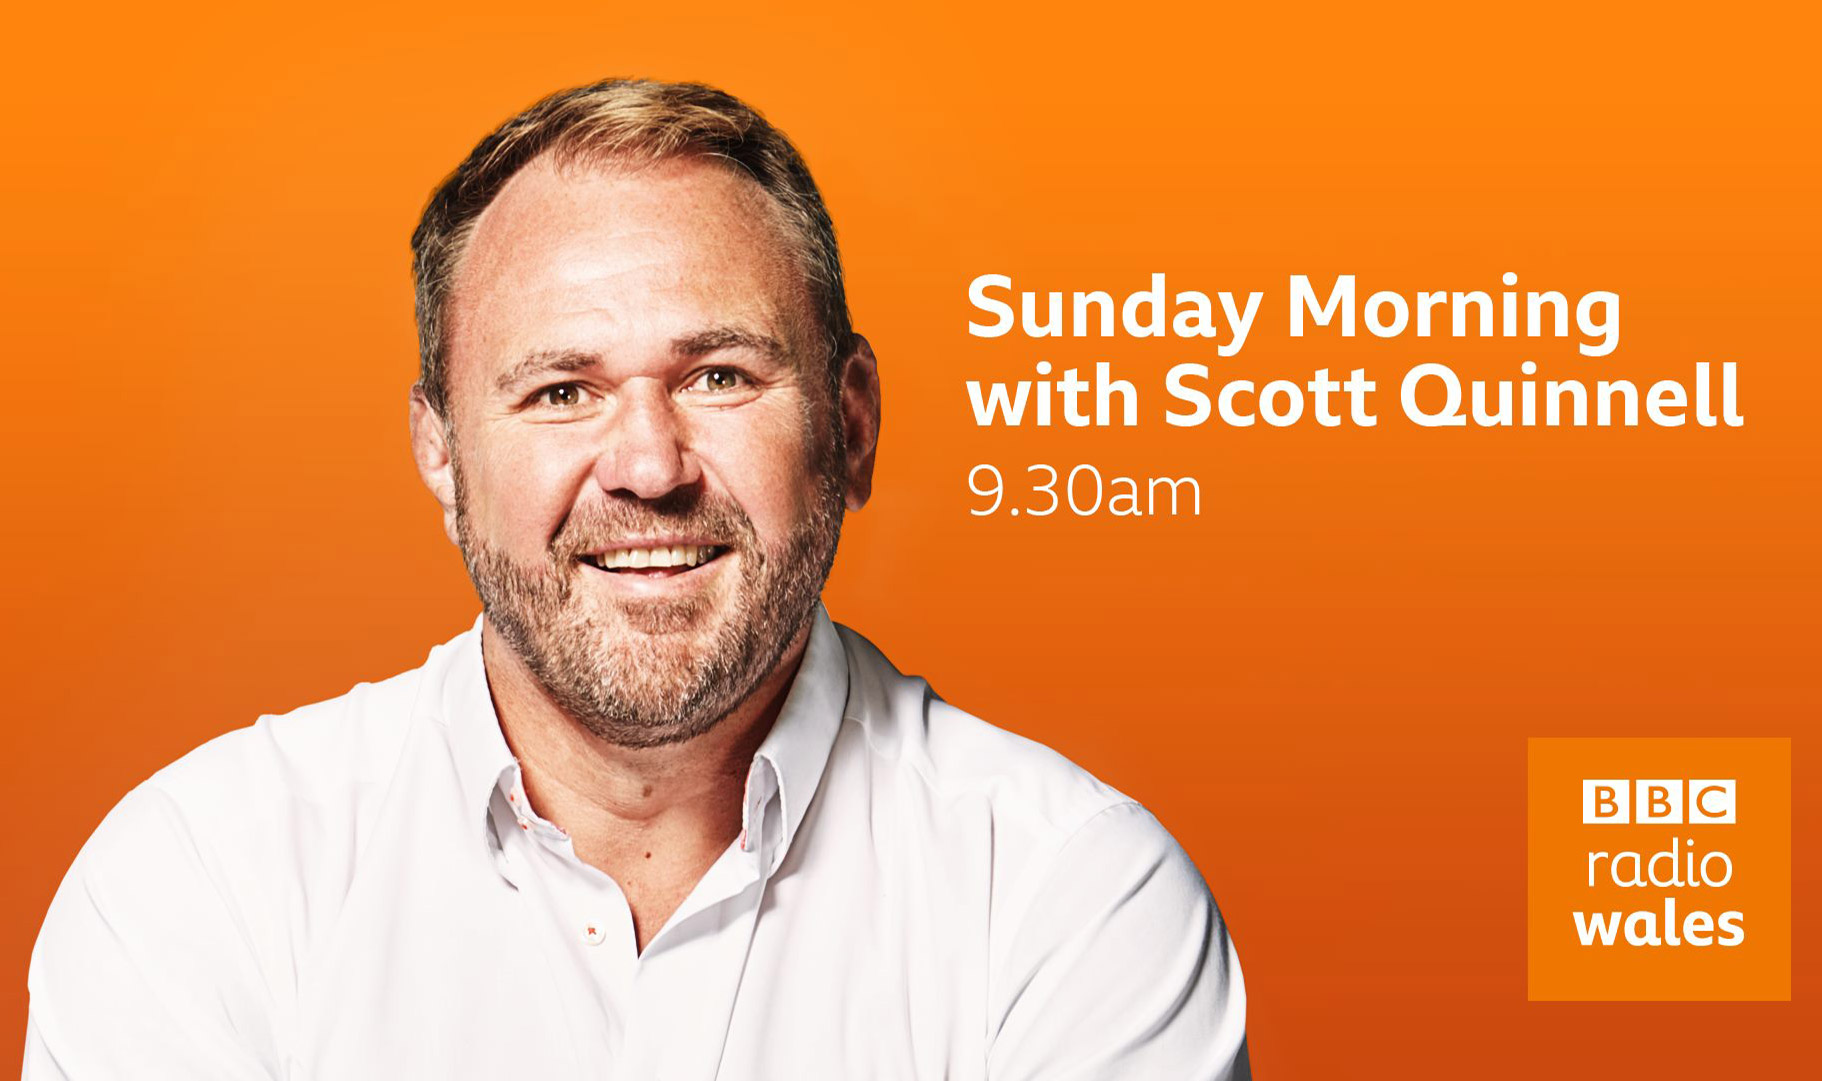 Sunday Morning with Scott Quinnell